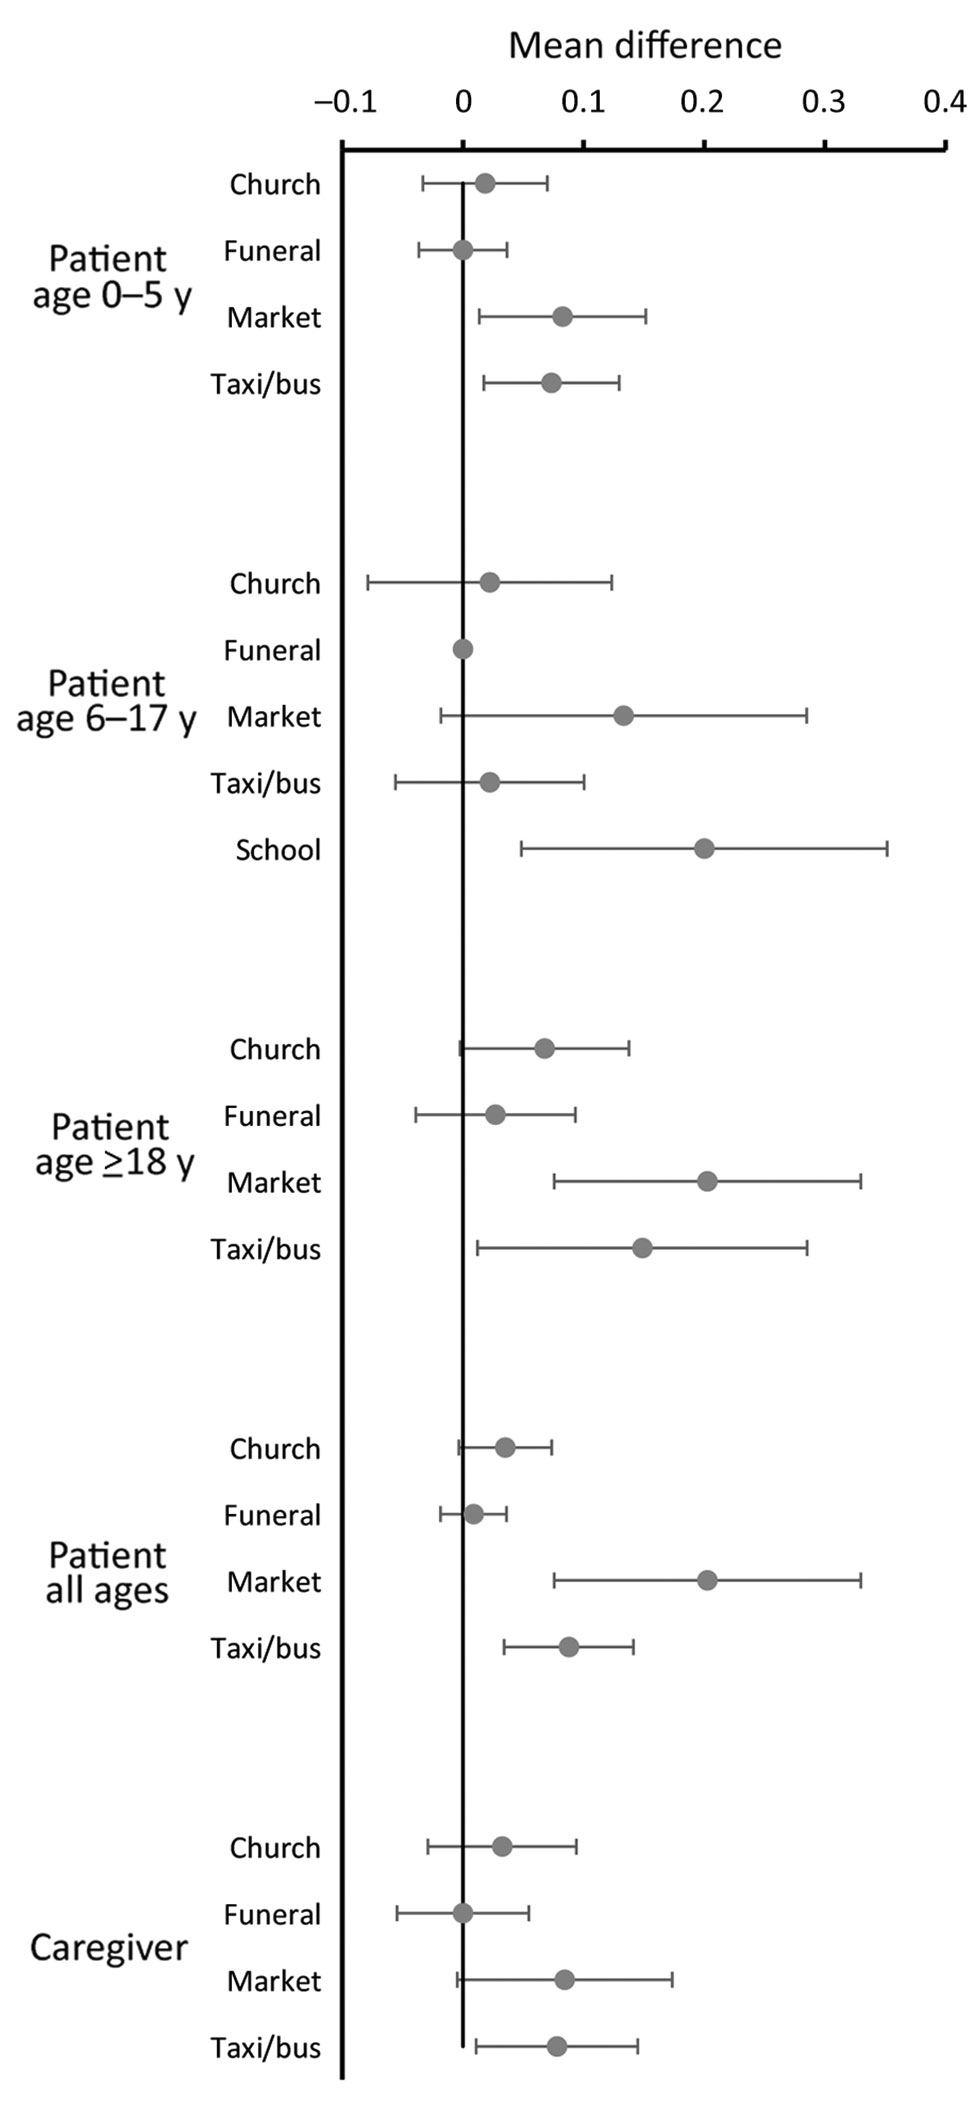 Mean differences in proportions of persons attending congregate settings when well compared with when ill (the day after the clinic visit), restricted to persons seen on the same day of the week when well and when ill, in study of the effect of acute illness on contact patterns, Malawi, 2017. Mean difference &gt;0 implies more visits when well; mean difference &lt;0 implies more visits when ill. Error bars indicate 95% CIs.